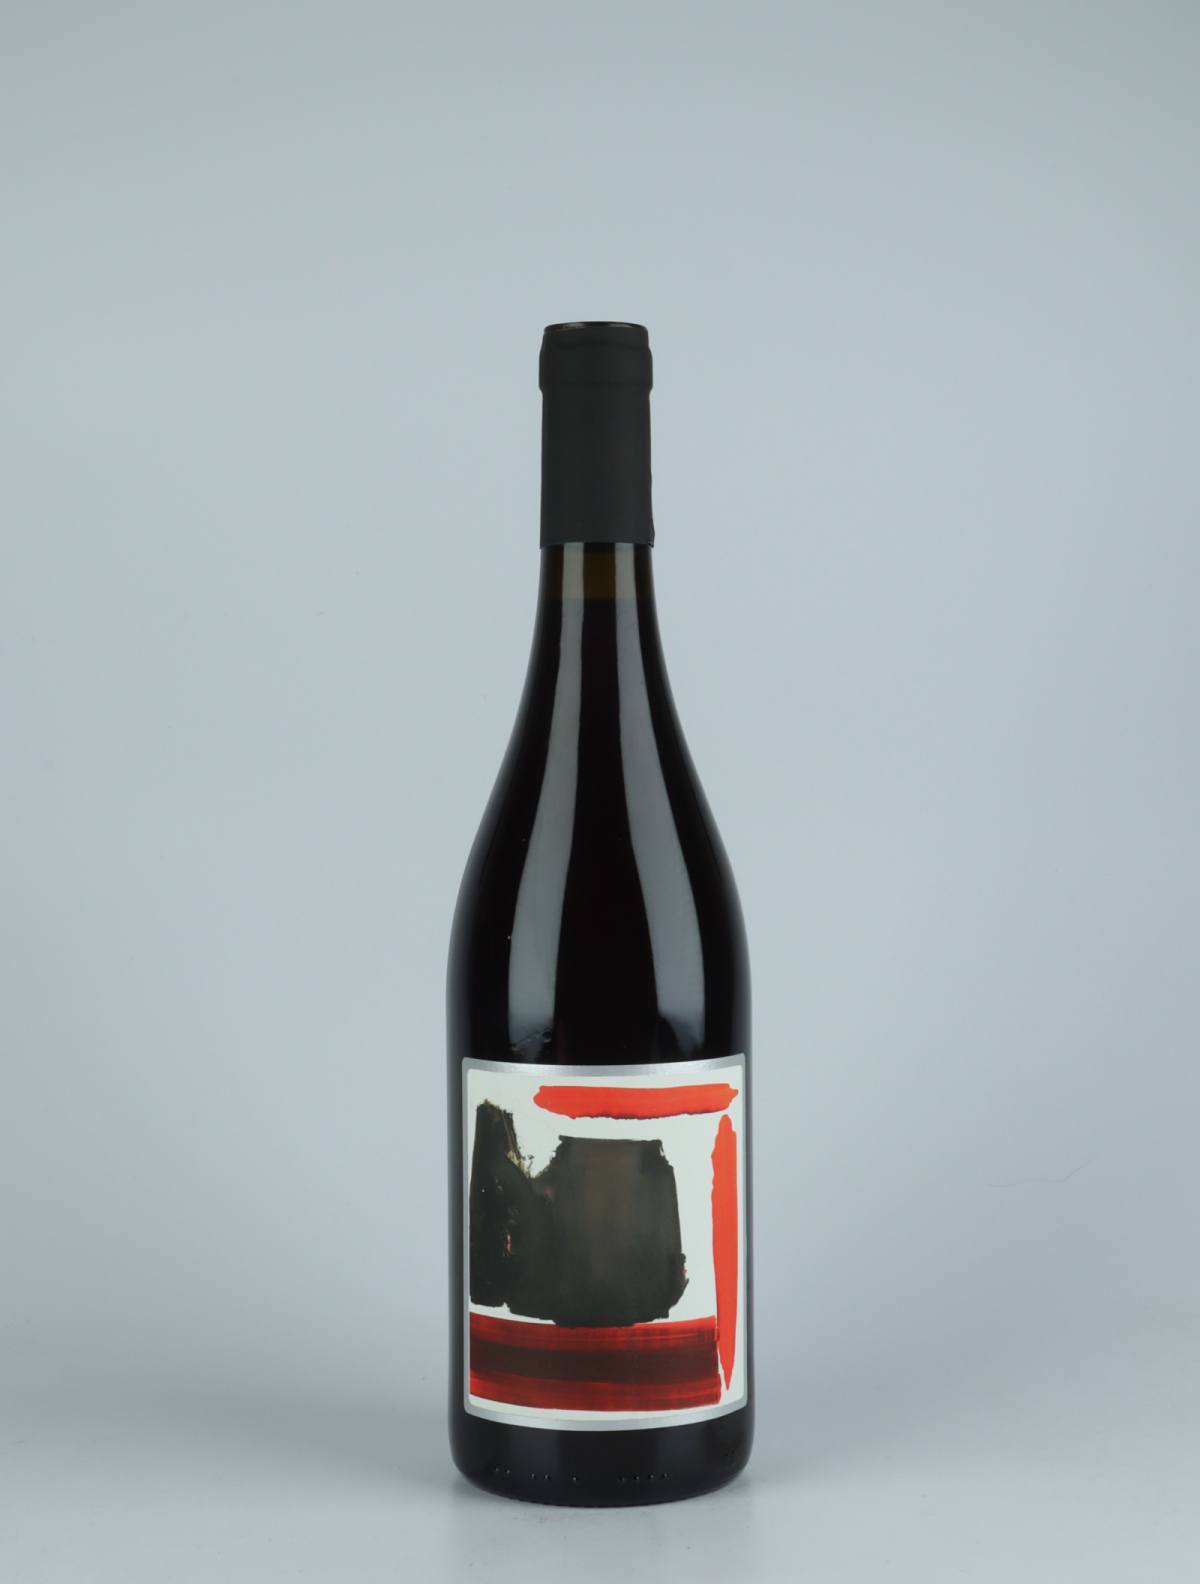 A bottle 2019 Cenerina Red wine from Cascina Val Liberata, Piedmont in Italy